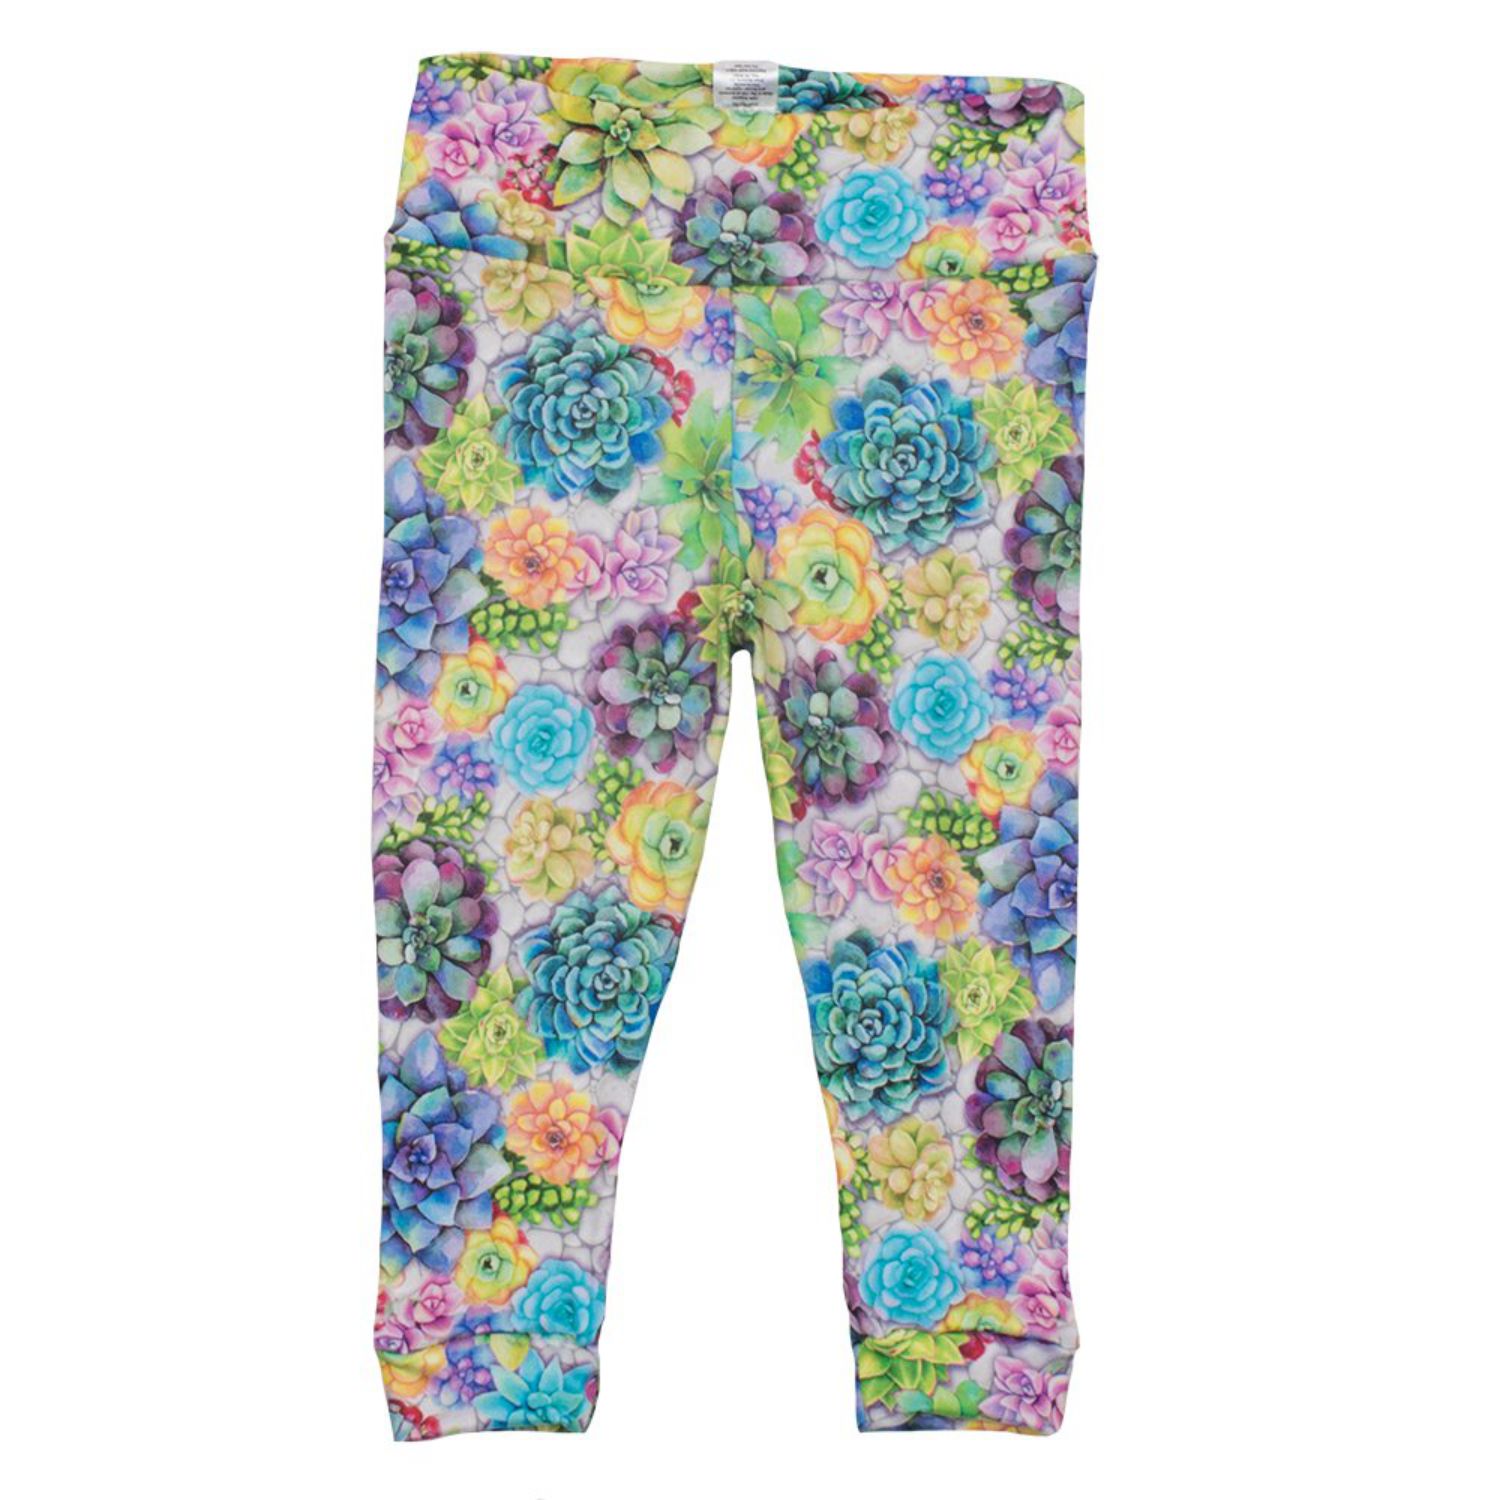 Bumblito Leggings Größe: S (50 - 68) / Muster: Succa for You